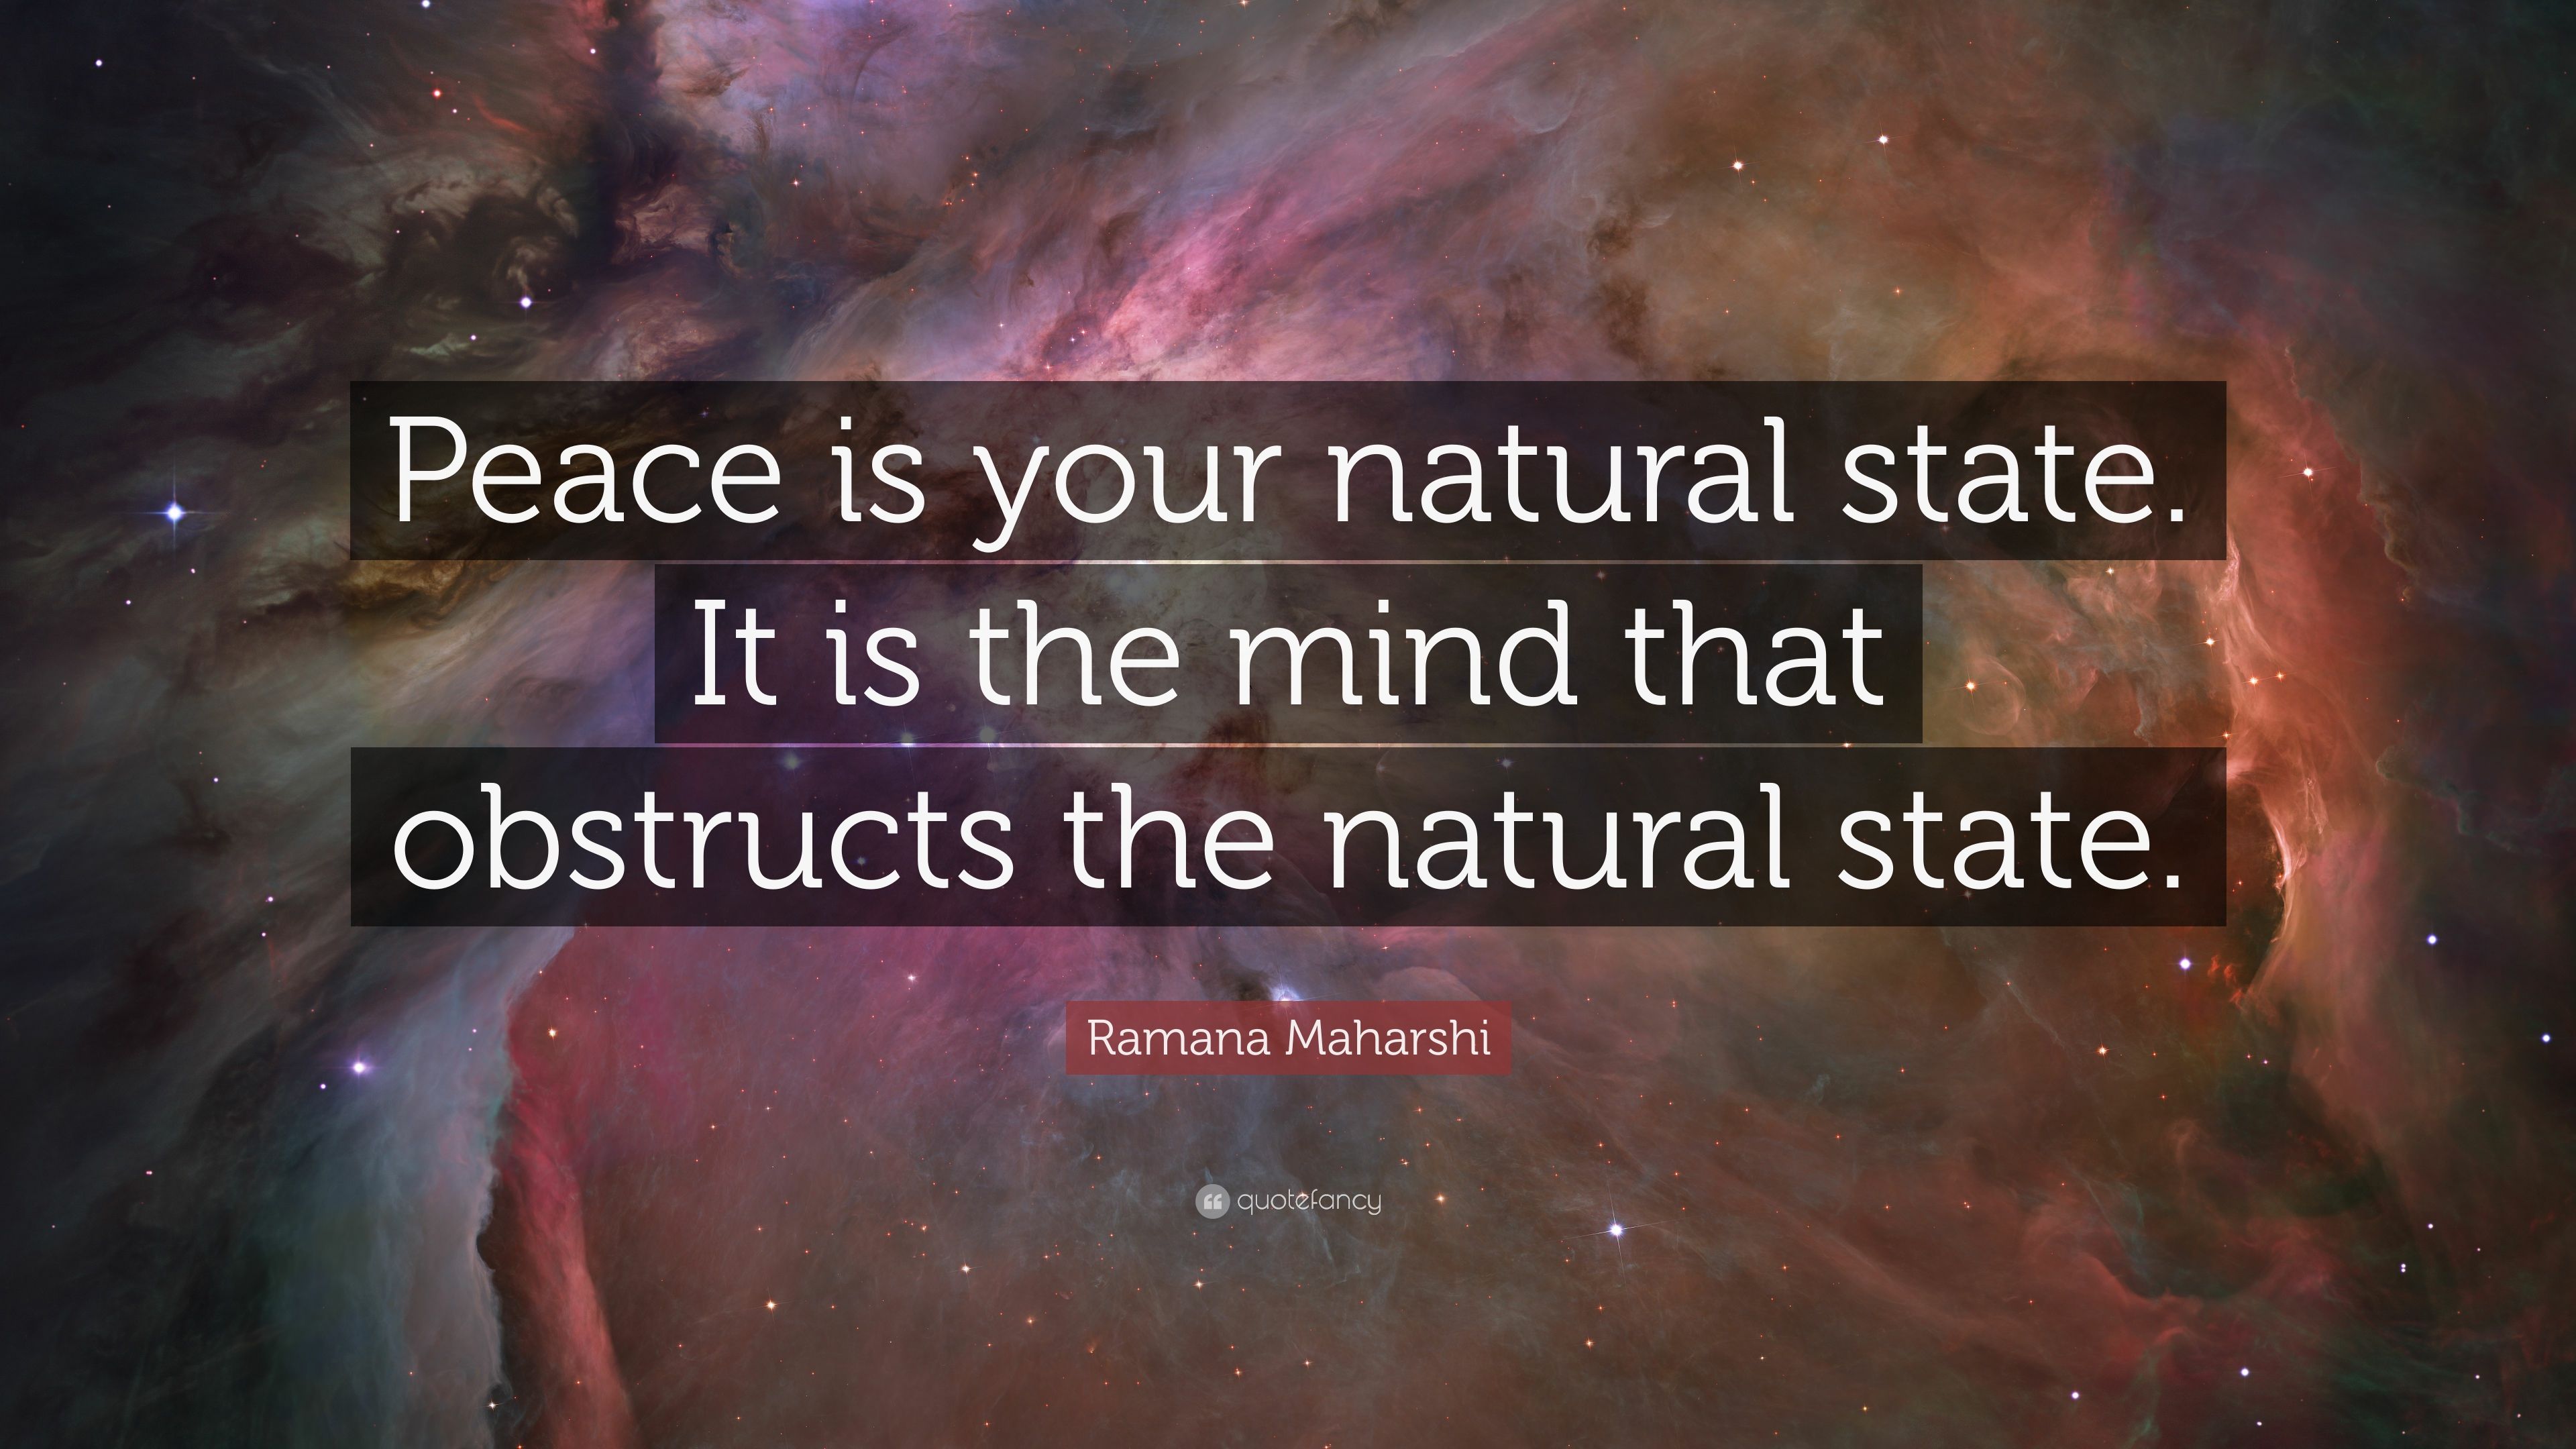 Ramana Maharshi Quote: “Peace is your natural state. It is